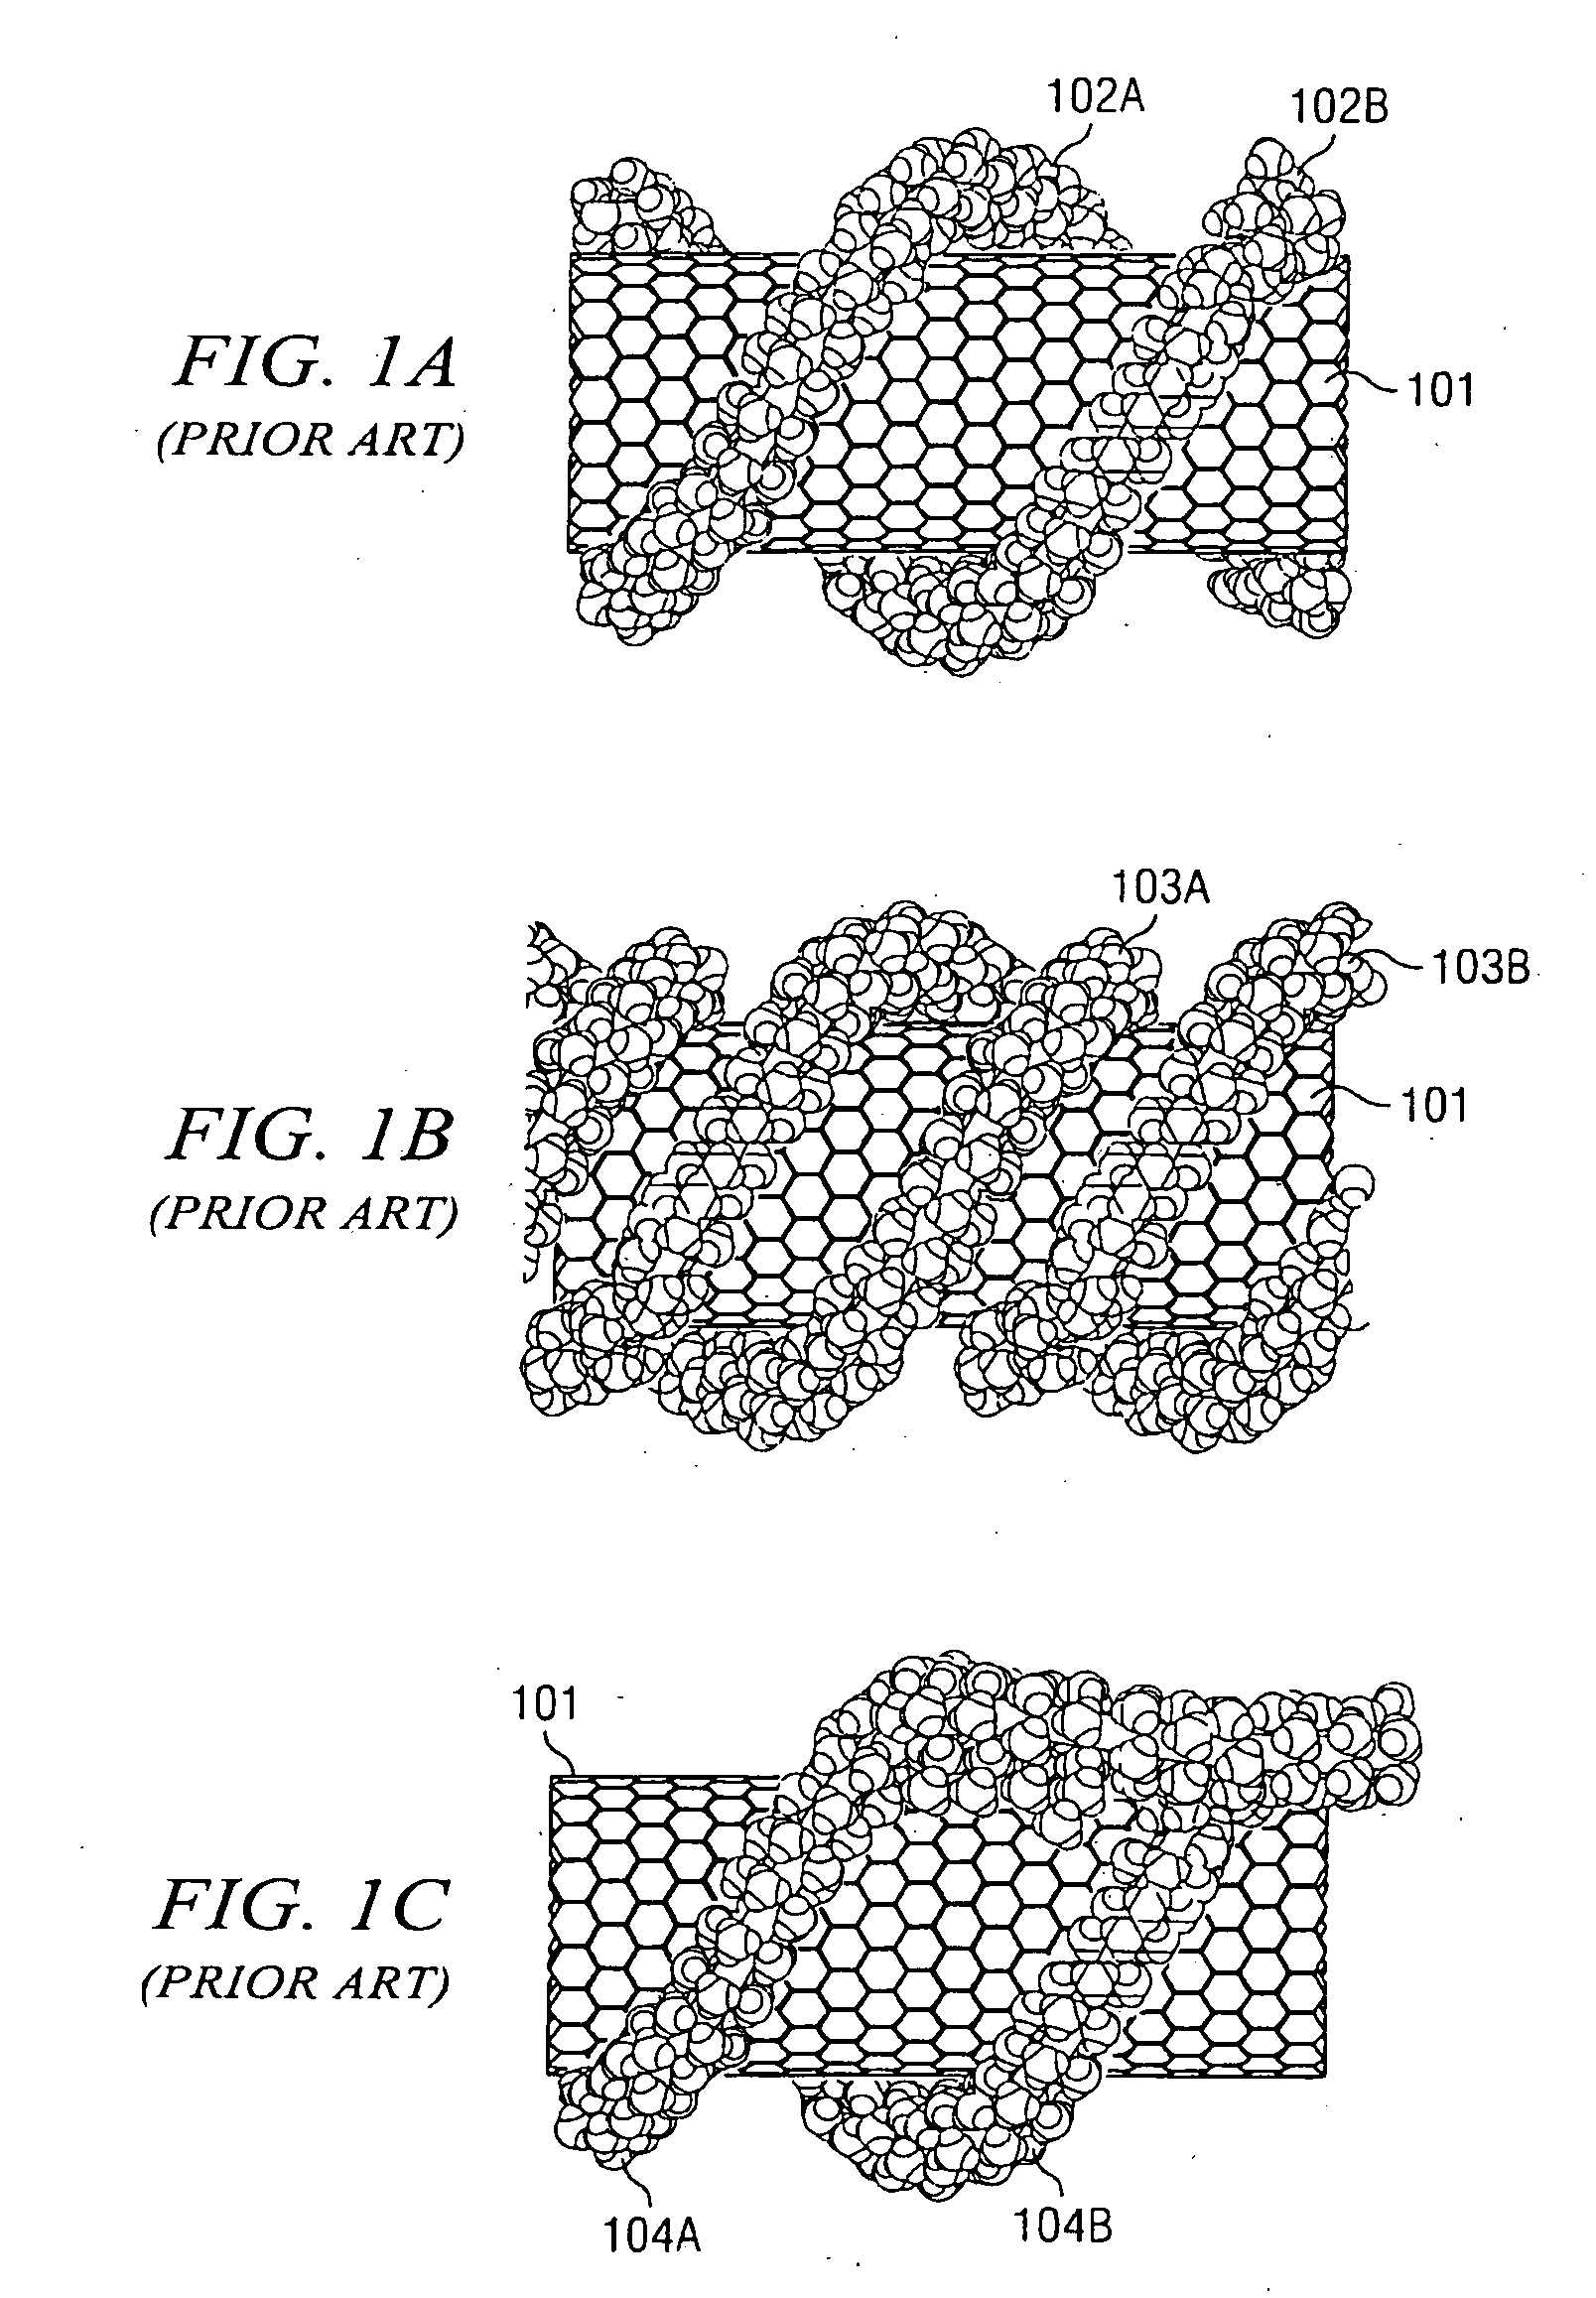 Polymer and method for using the polymer for noncovalently functionalizing nanotubes